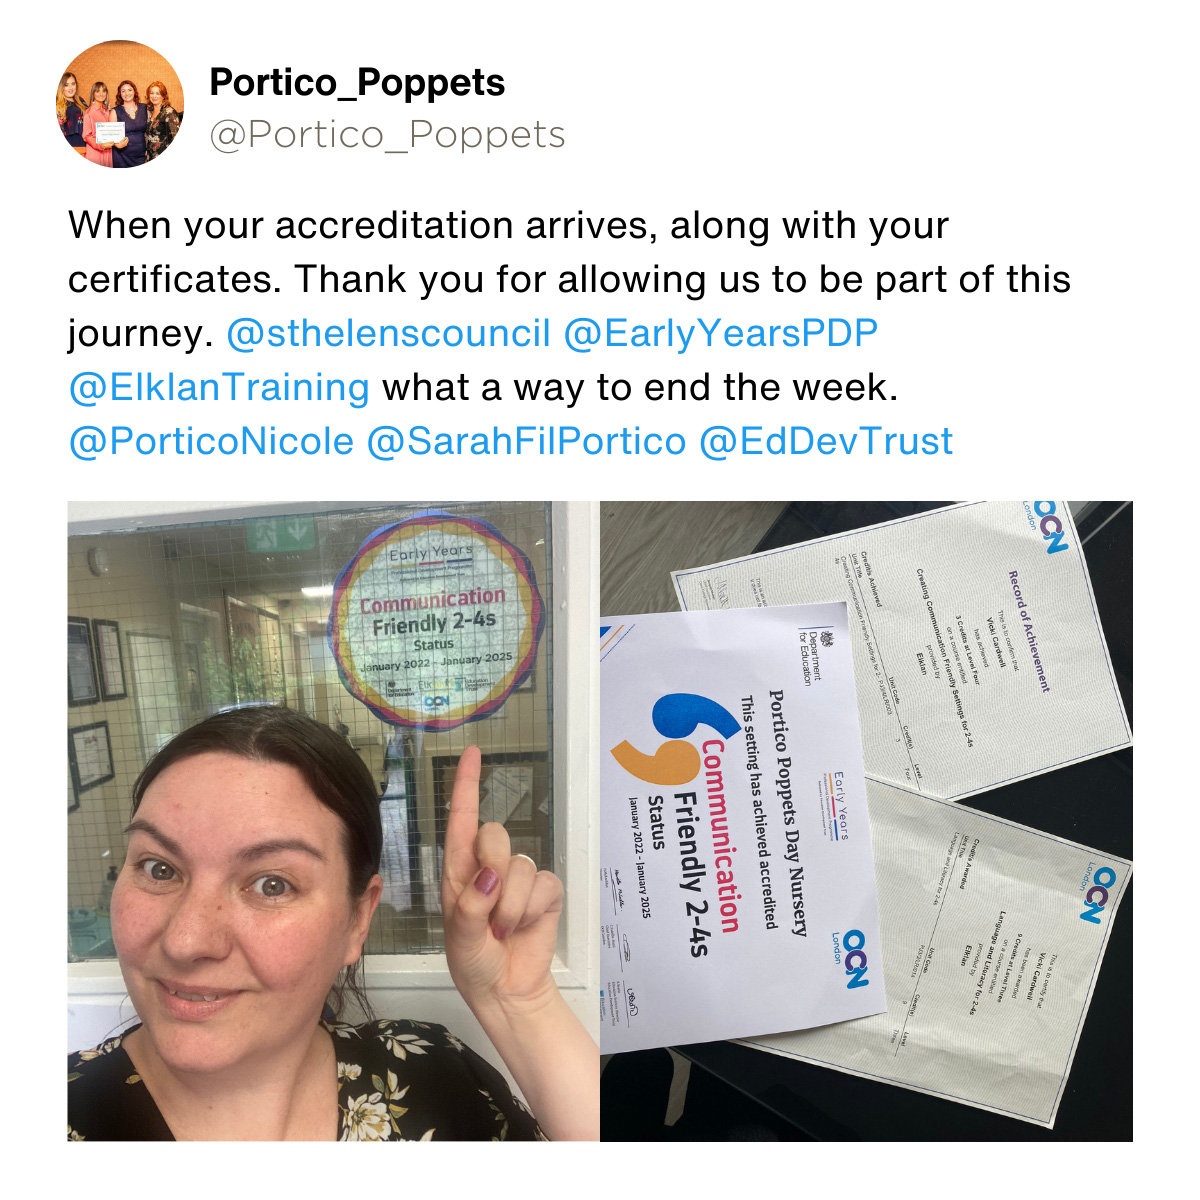 Portico Poppets: When your accreditation arrives, along with your certificates. Thank you for allowing us to be part of this journey. What a way to end the week.